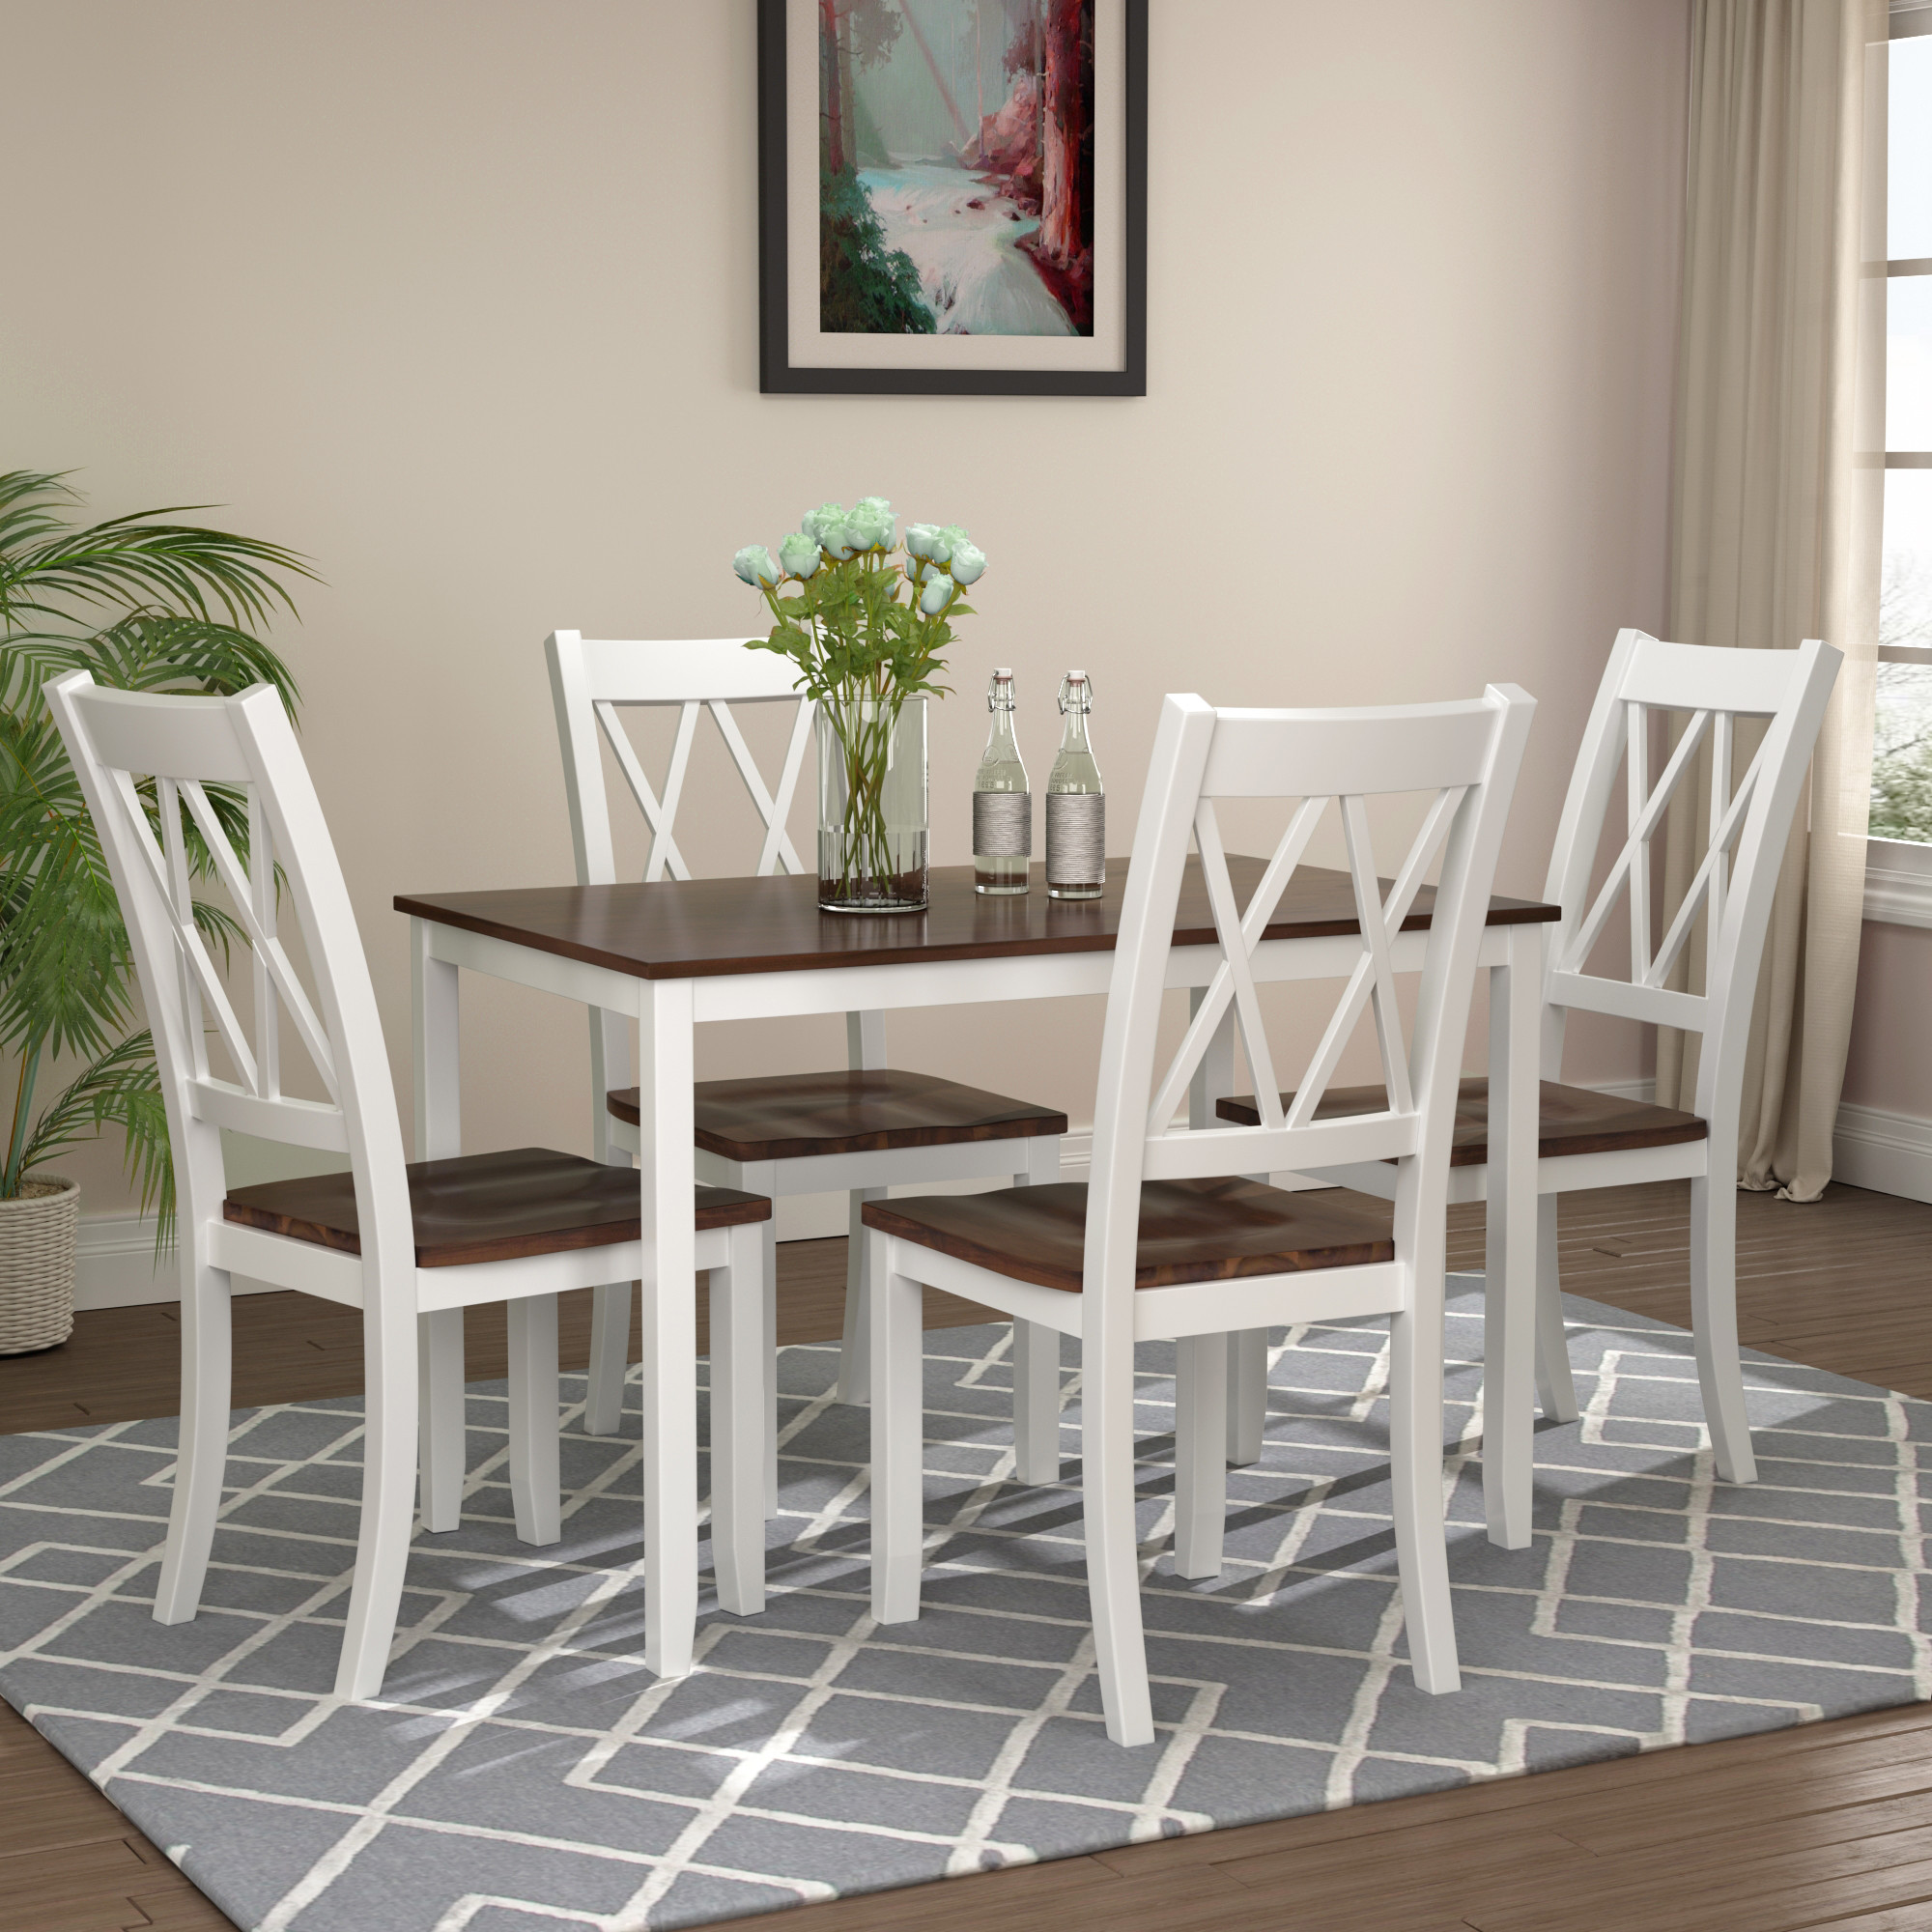 Small Rectangular Kitchen Table Sets
 Clearance Dining Table Set with 4 Chairs 5 Piece Wooden